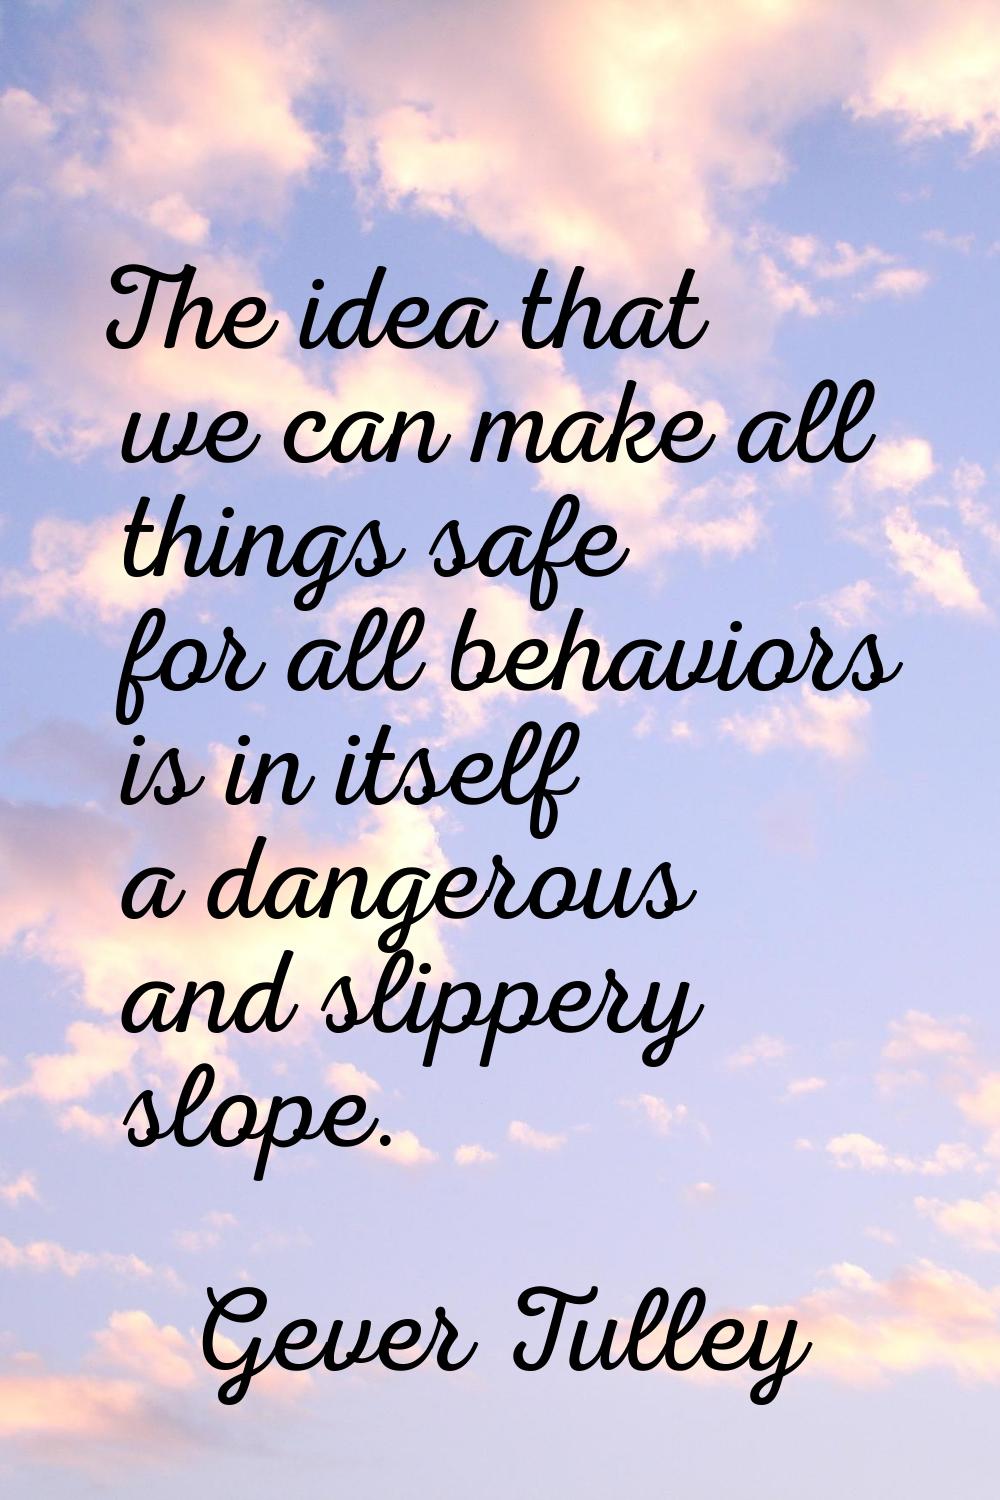 The idea that we can make all things safe for all behaviors is in itself a dangerous and slippery s